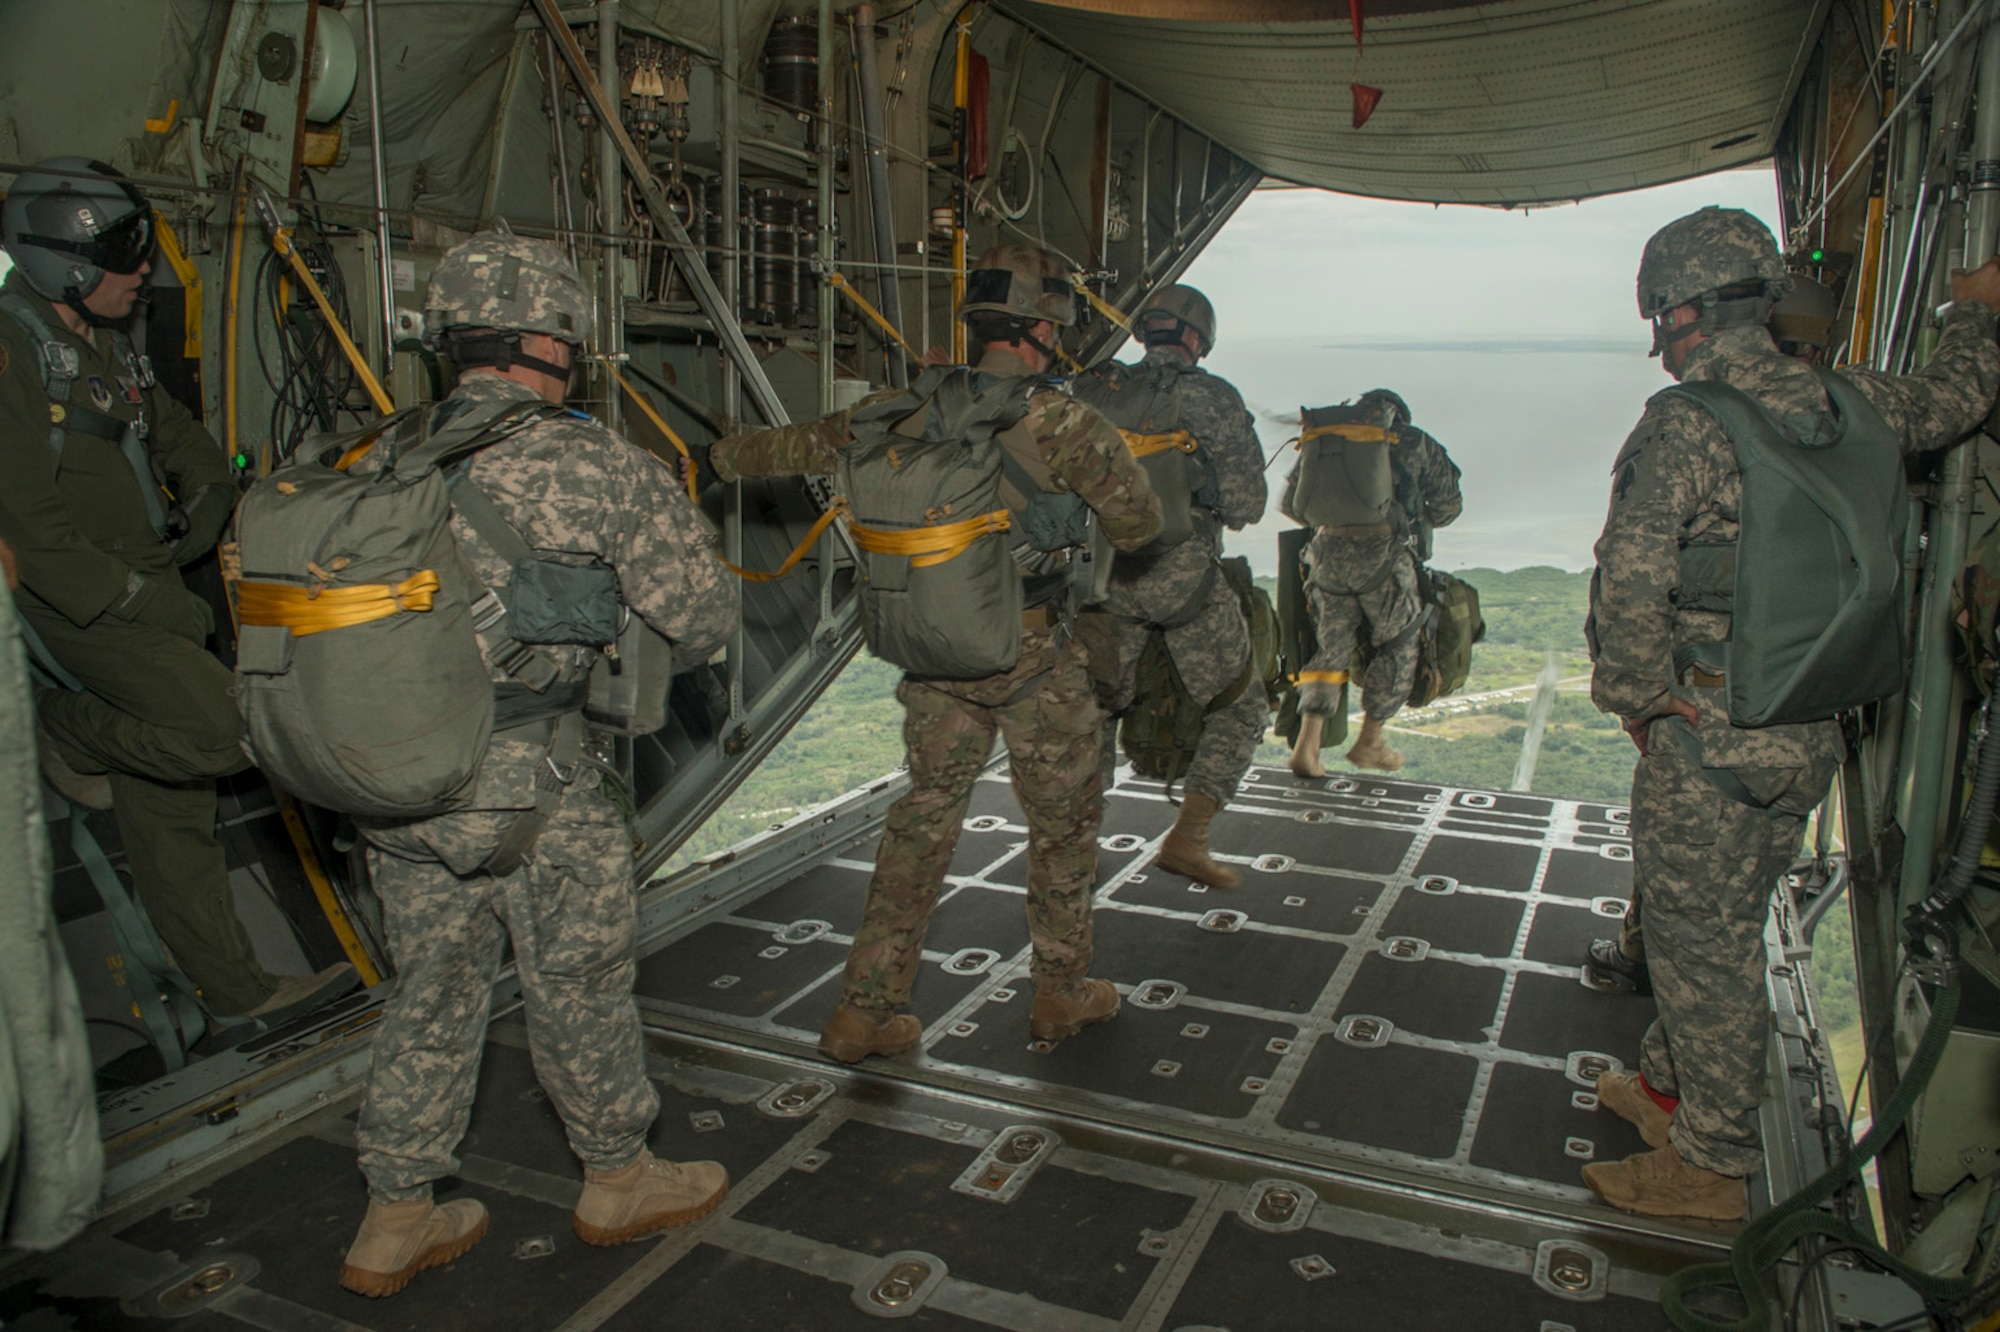 Paratroopers from the U.S. Army, Navy, Maries, and Air Force do a static line jump from a C-130H2 aircraft belonging to the 136th Airlift Wing, Texas Air National Guard during a joint airborne air transportability training at McDill AFB, Fla., Nov. 15, 2013. The paratroopers jumped from 1,000 feet above ground level. . (Air National Guard photo by Senior Master Sgt. Elizabeth Gilbert/released)